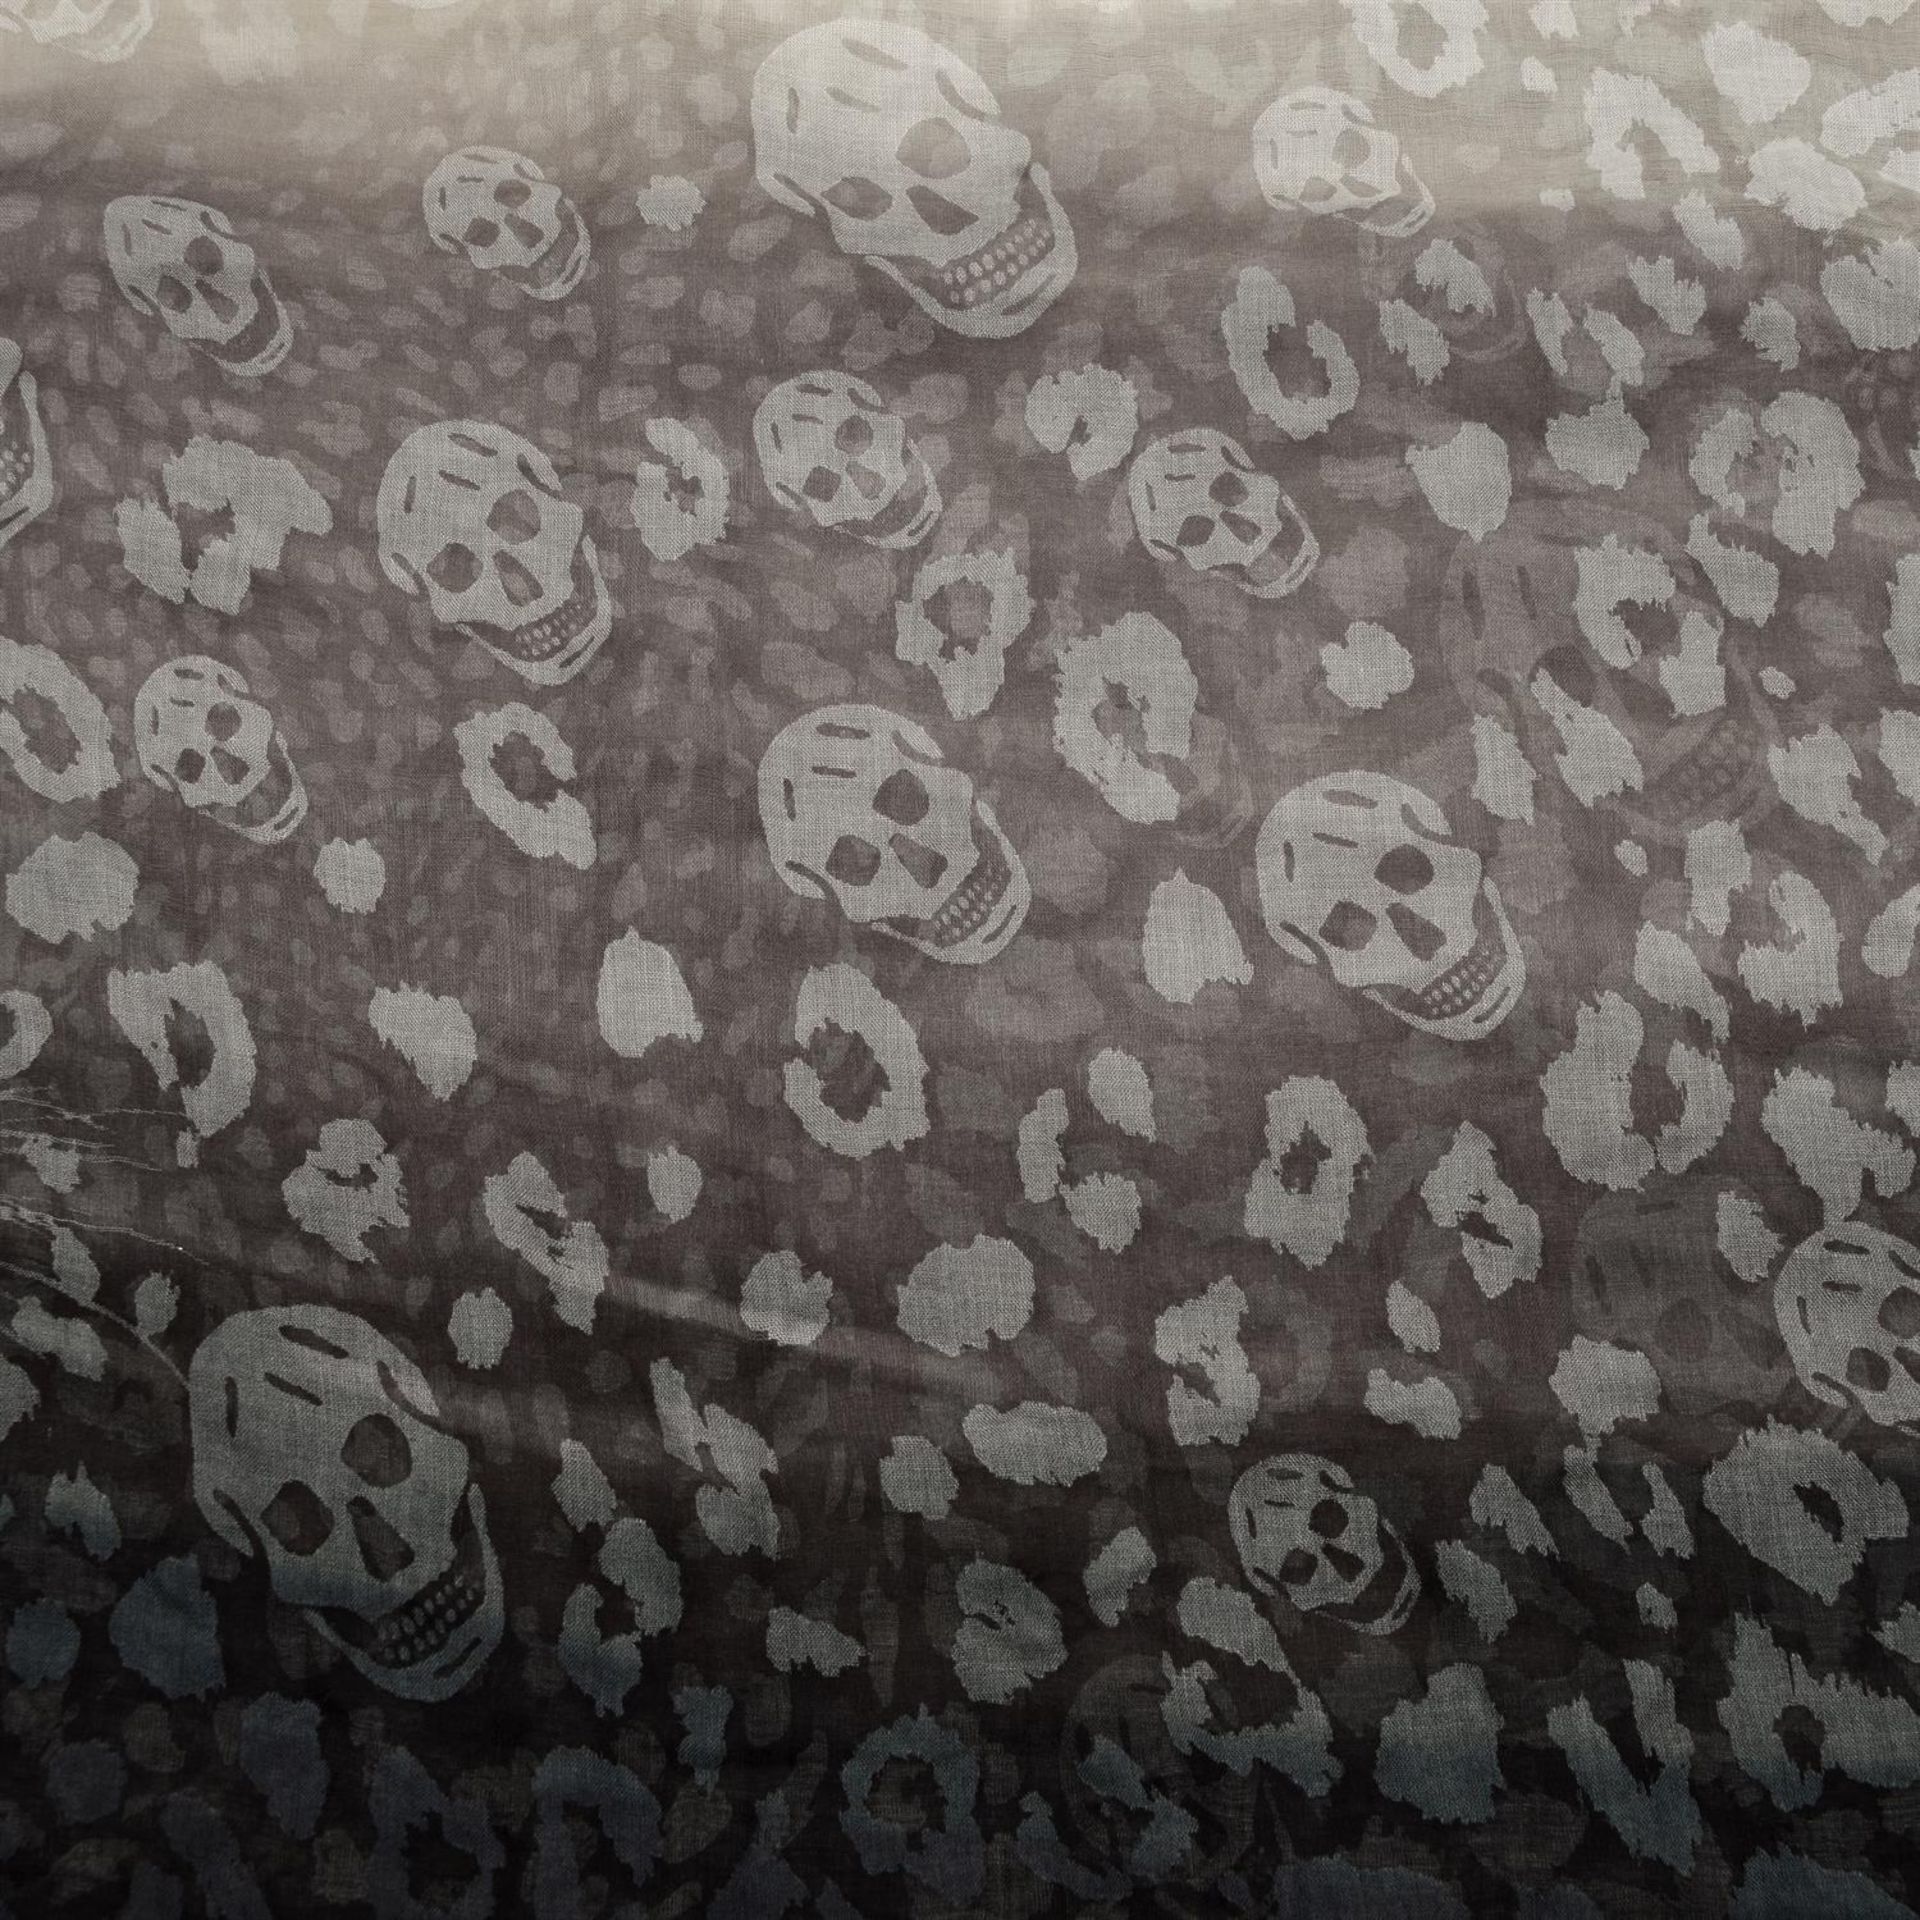 ALEXANDER MCQUEEN – a silk blend greyscale skull print stole. - Image 3 of 3